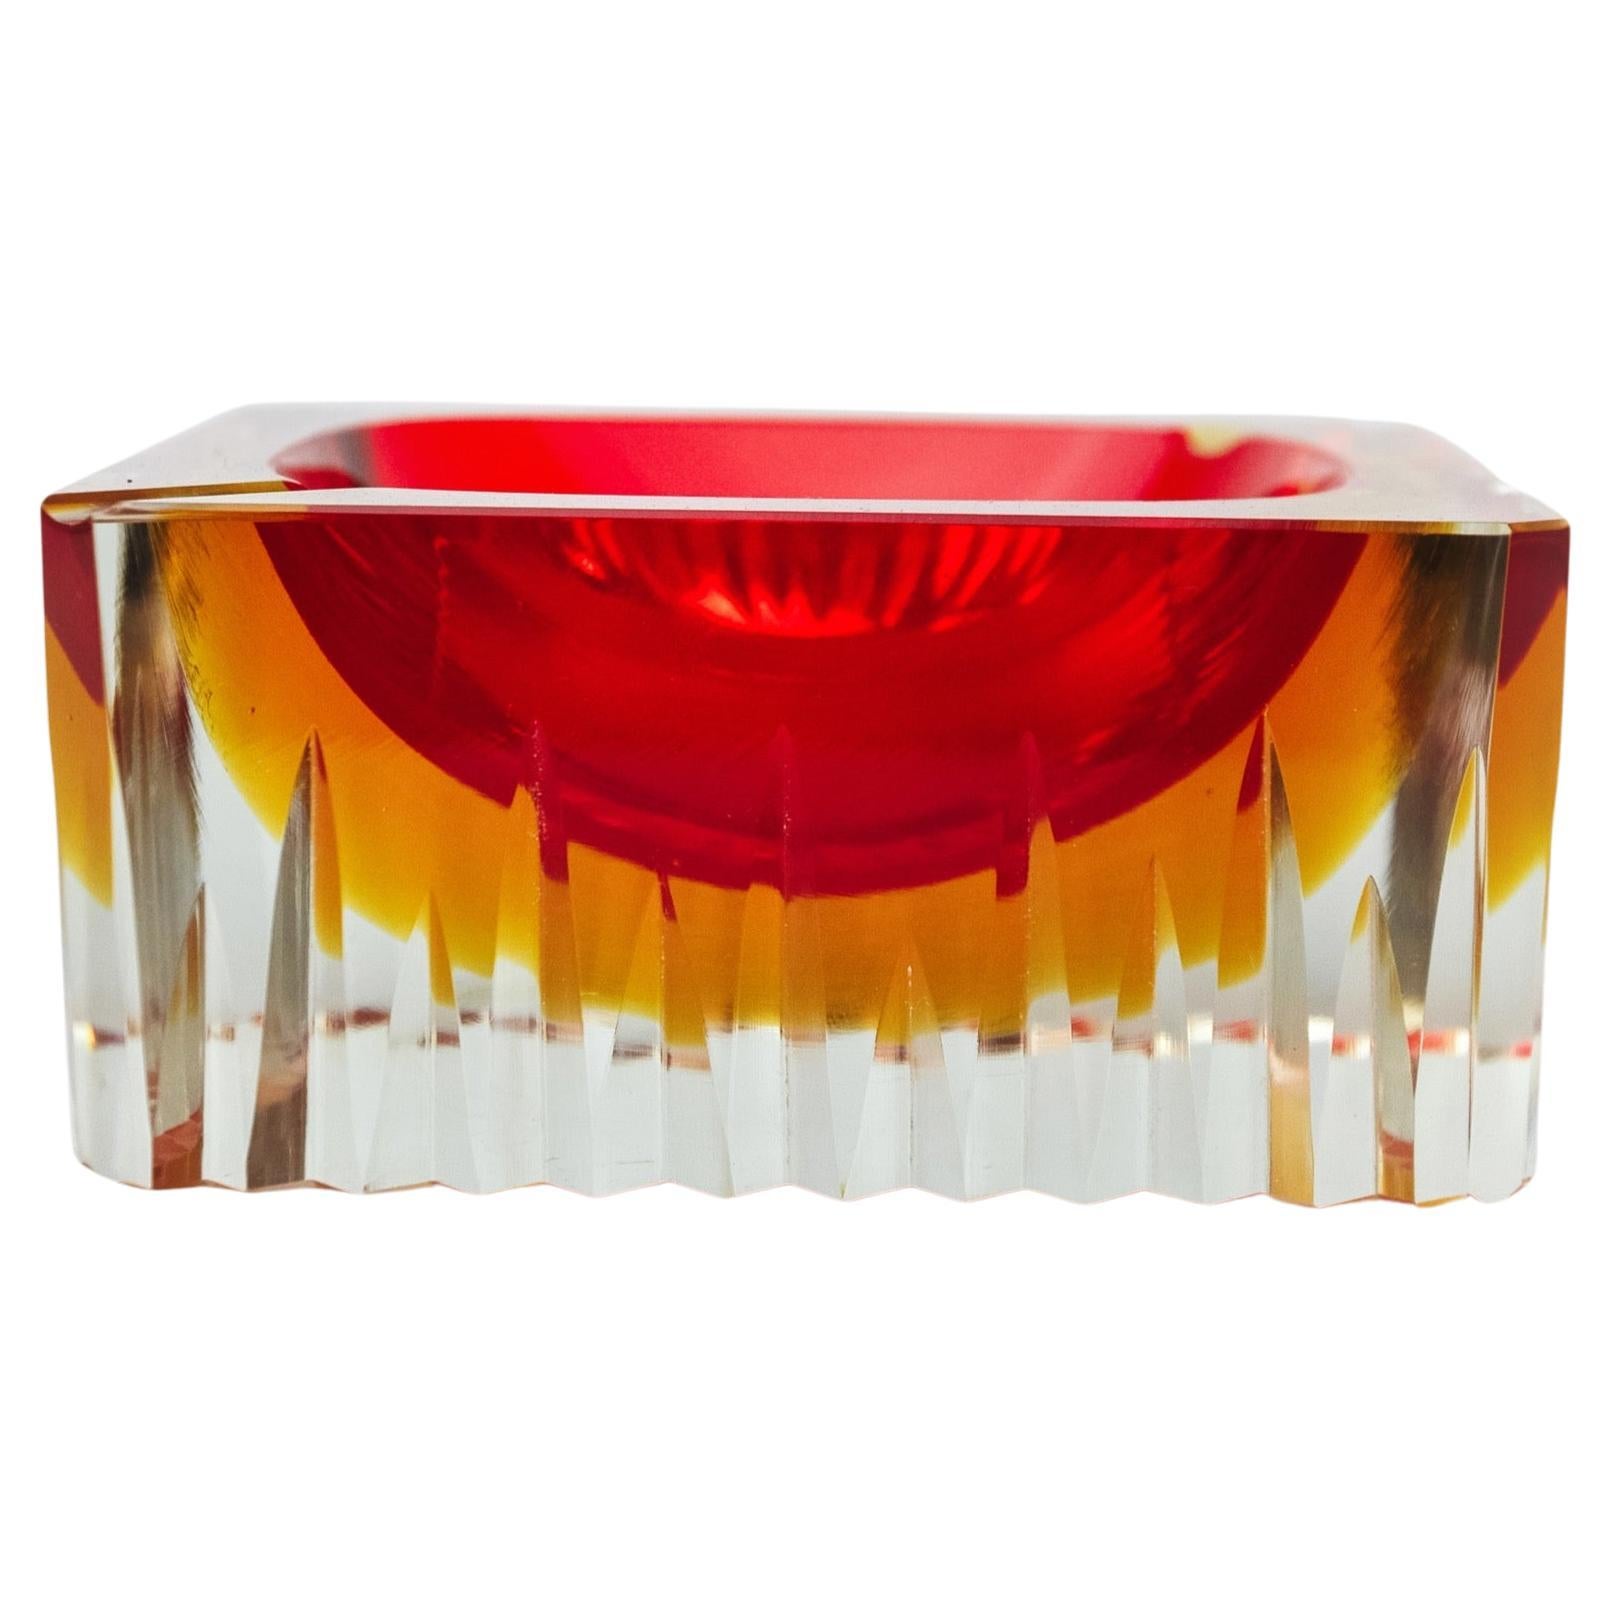 Red and yellow cubic Sommerso ashtray by Seguso, Murano, Italy, 1970 For Sale